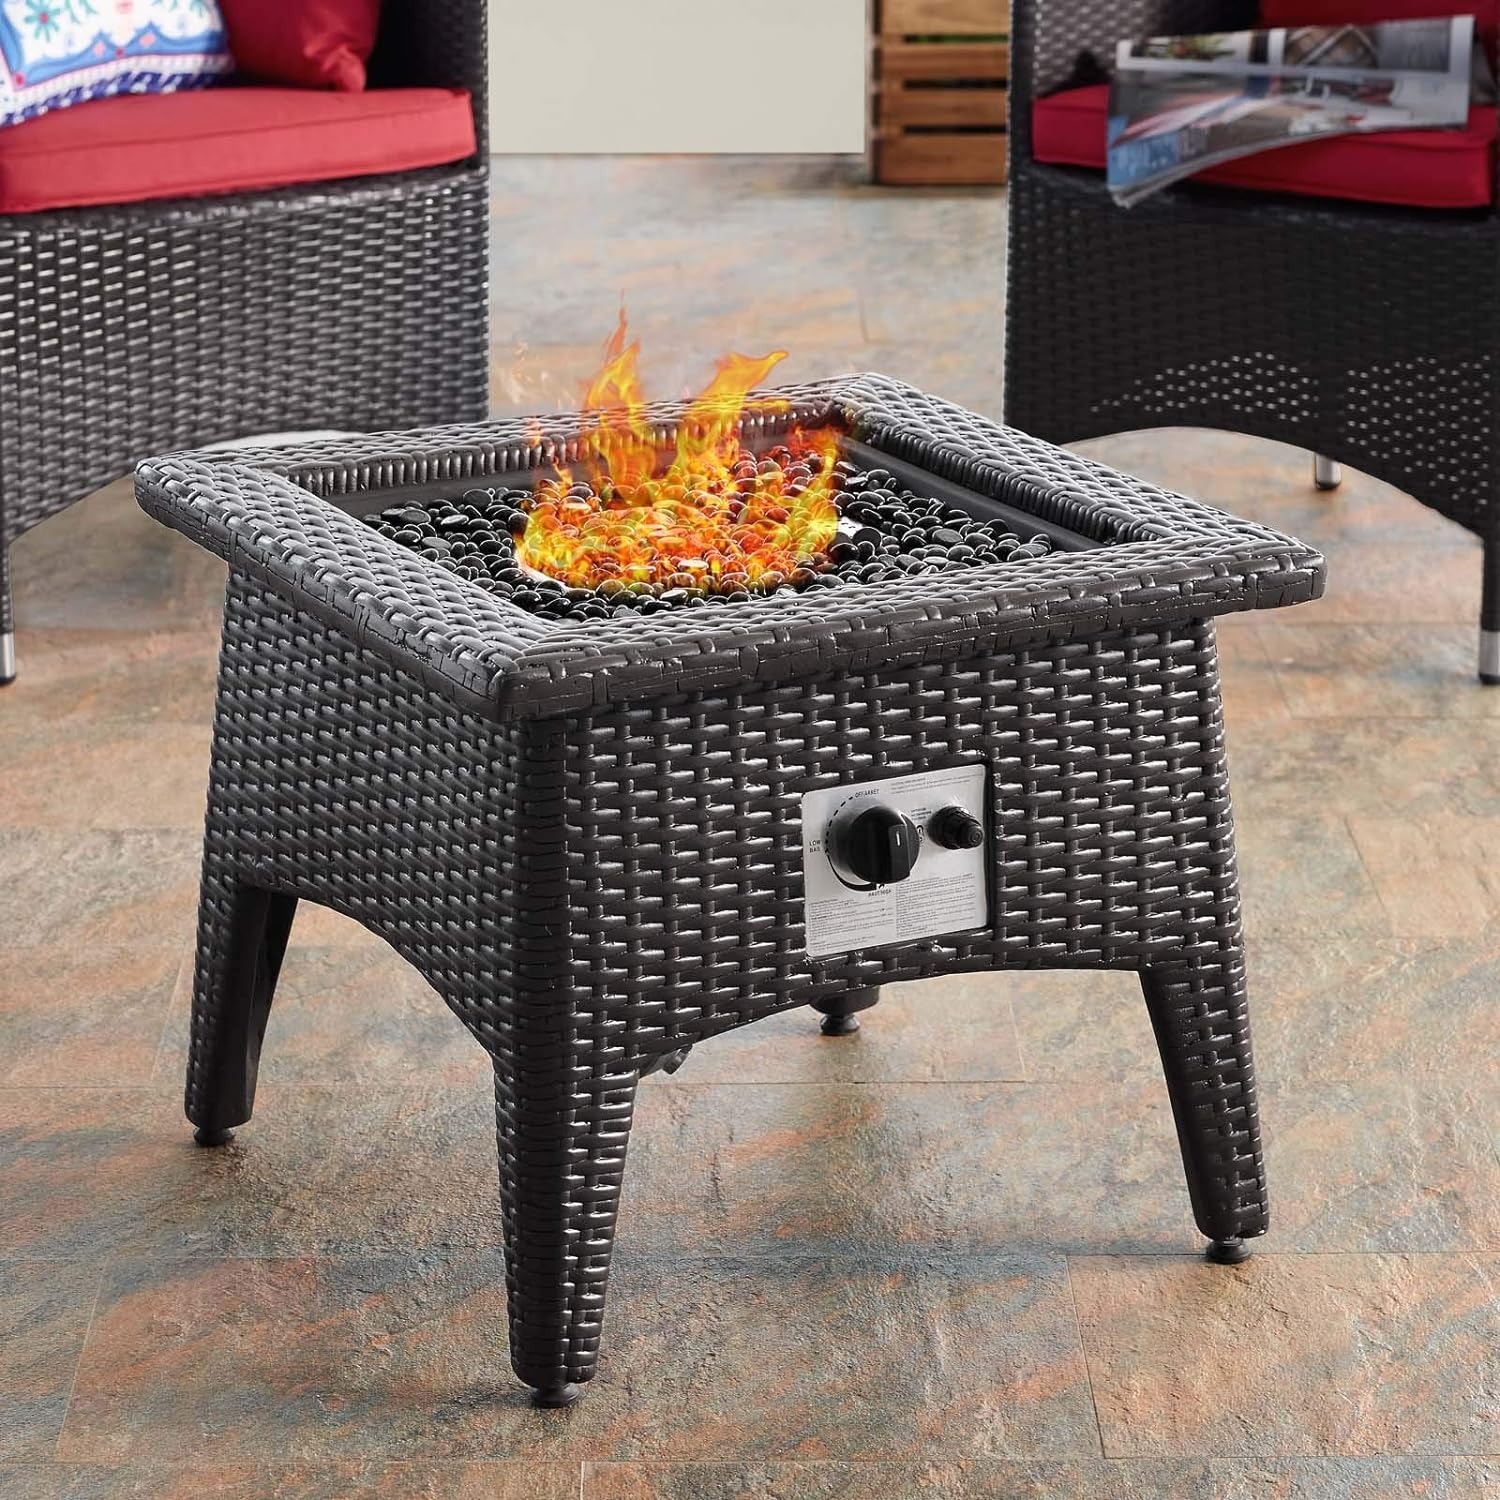 Modway 43" Vivacity Wicker Rattan Square Propane Gas Fire Pit Table $142 + Free Shipping